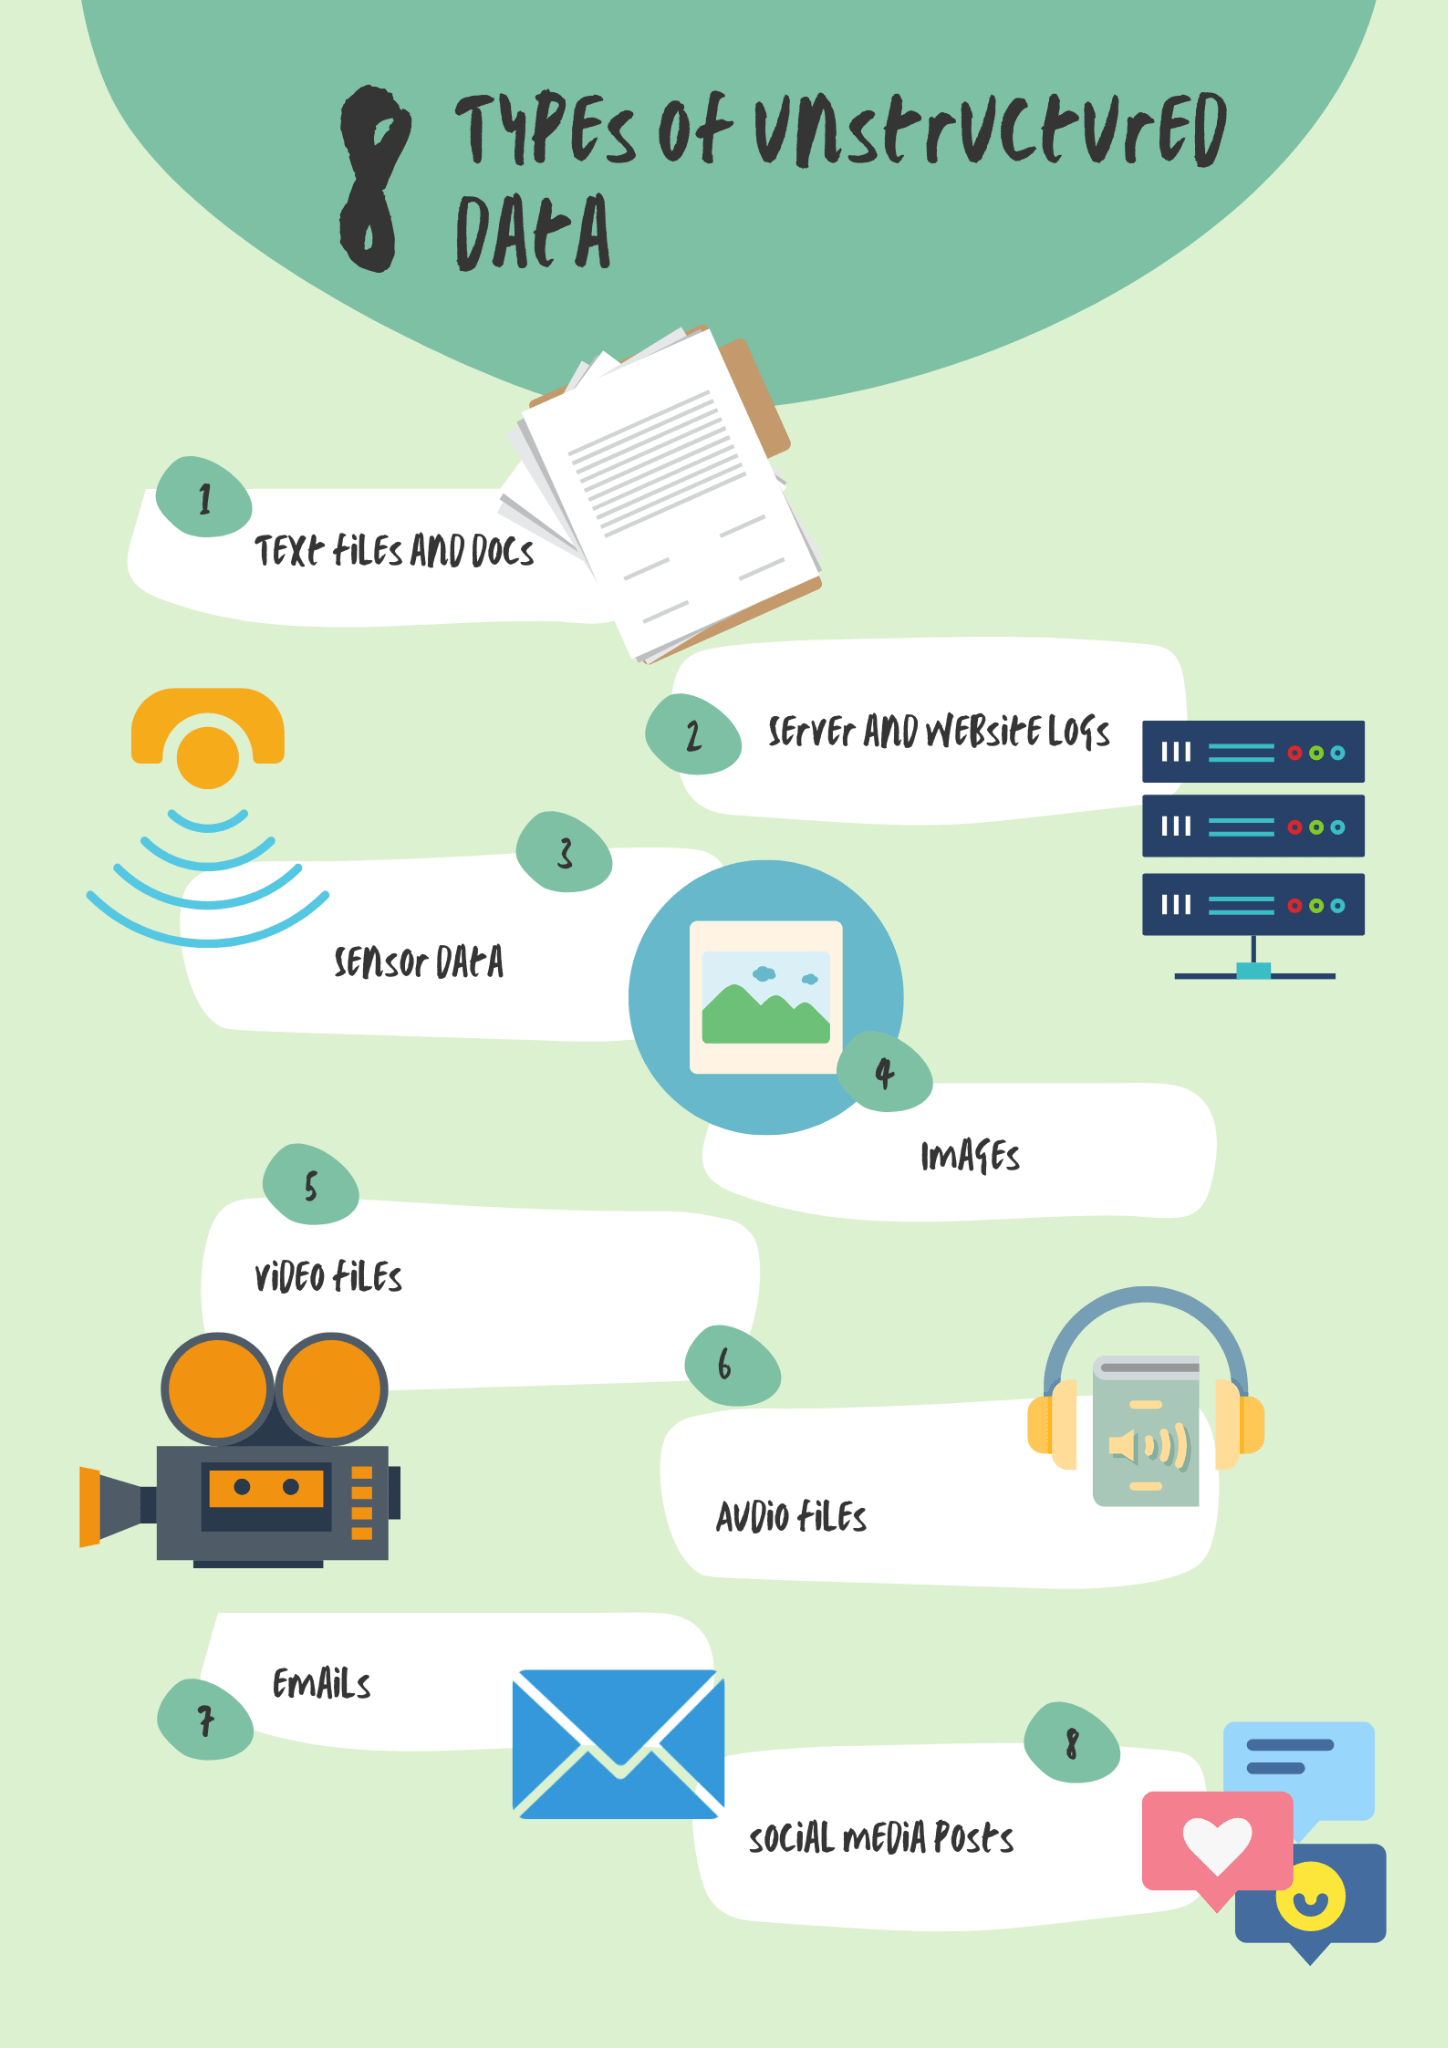 Graphic showing eight types of unstructured data: text docs, server and website logs, sensor data, images, videos, audio files, emails, and social media posts